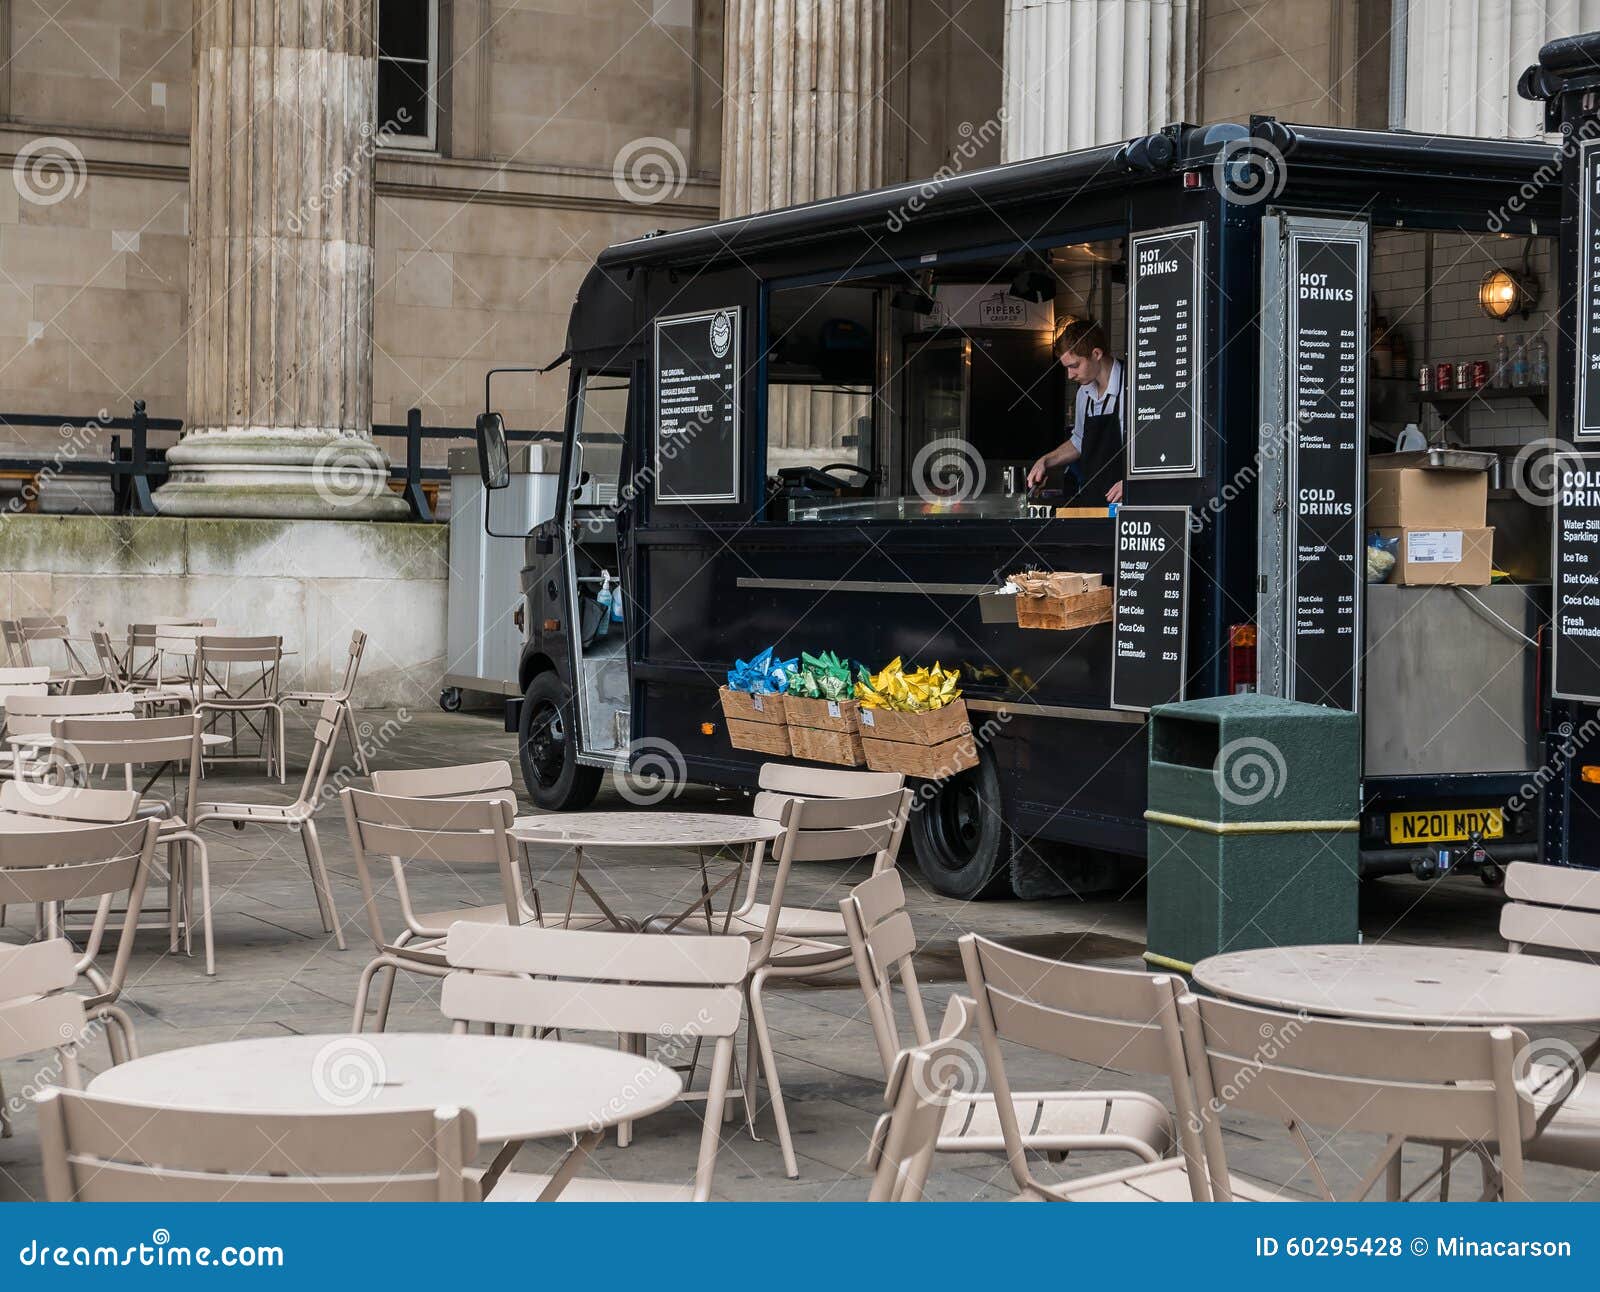 Refreshment Truck Prepares for Day in British Museum Courtyard ...